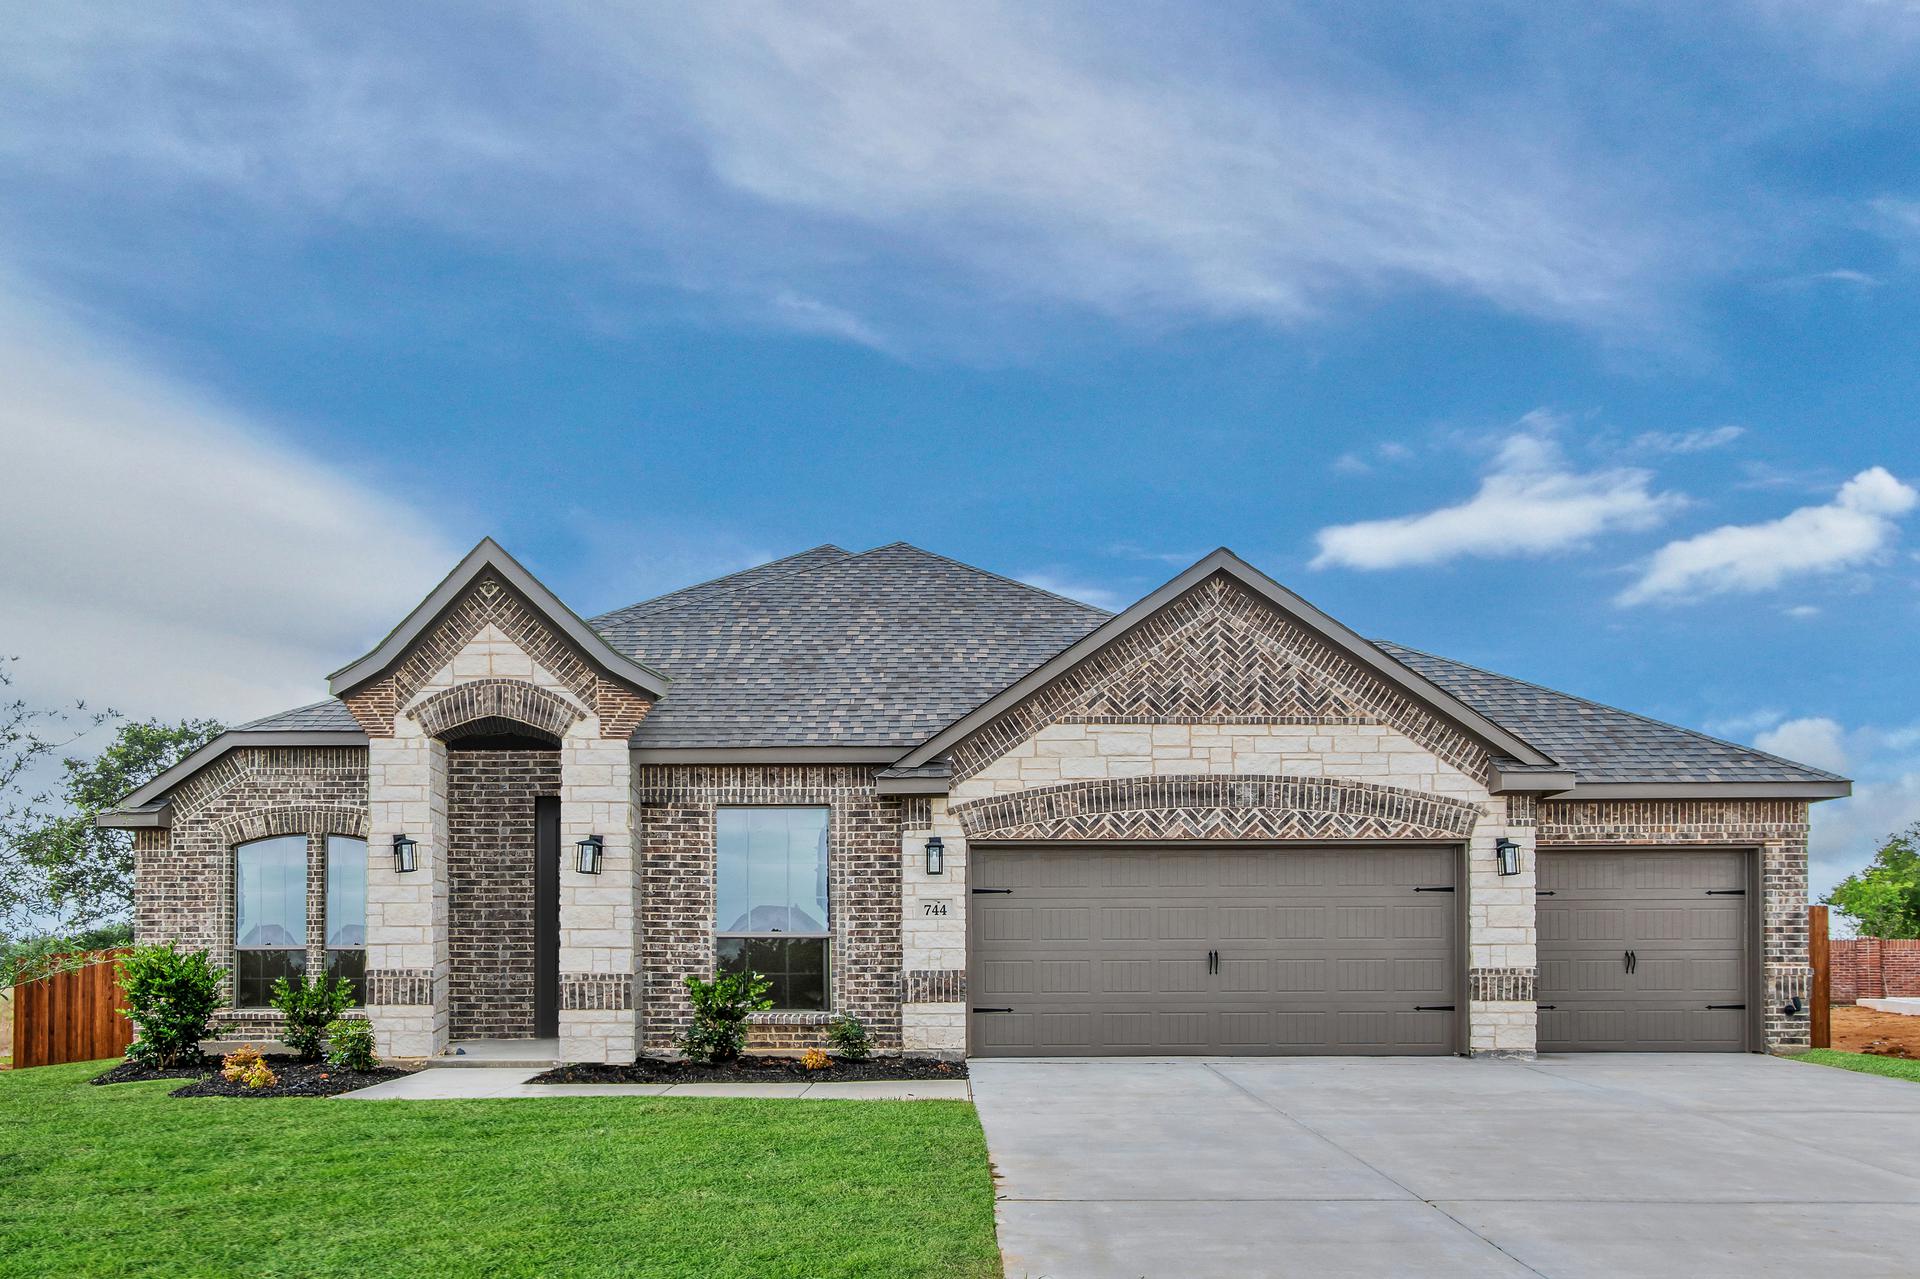 2671 A with Stone and 3-car garage. Concept 2671 Home with 4 Bedrooms